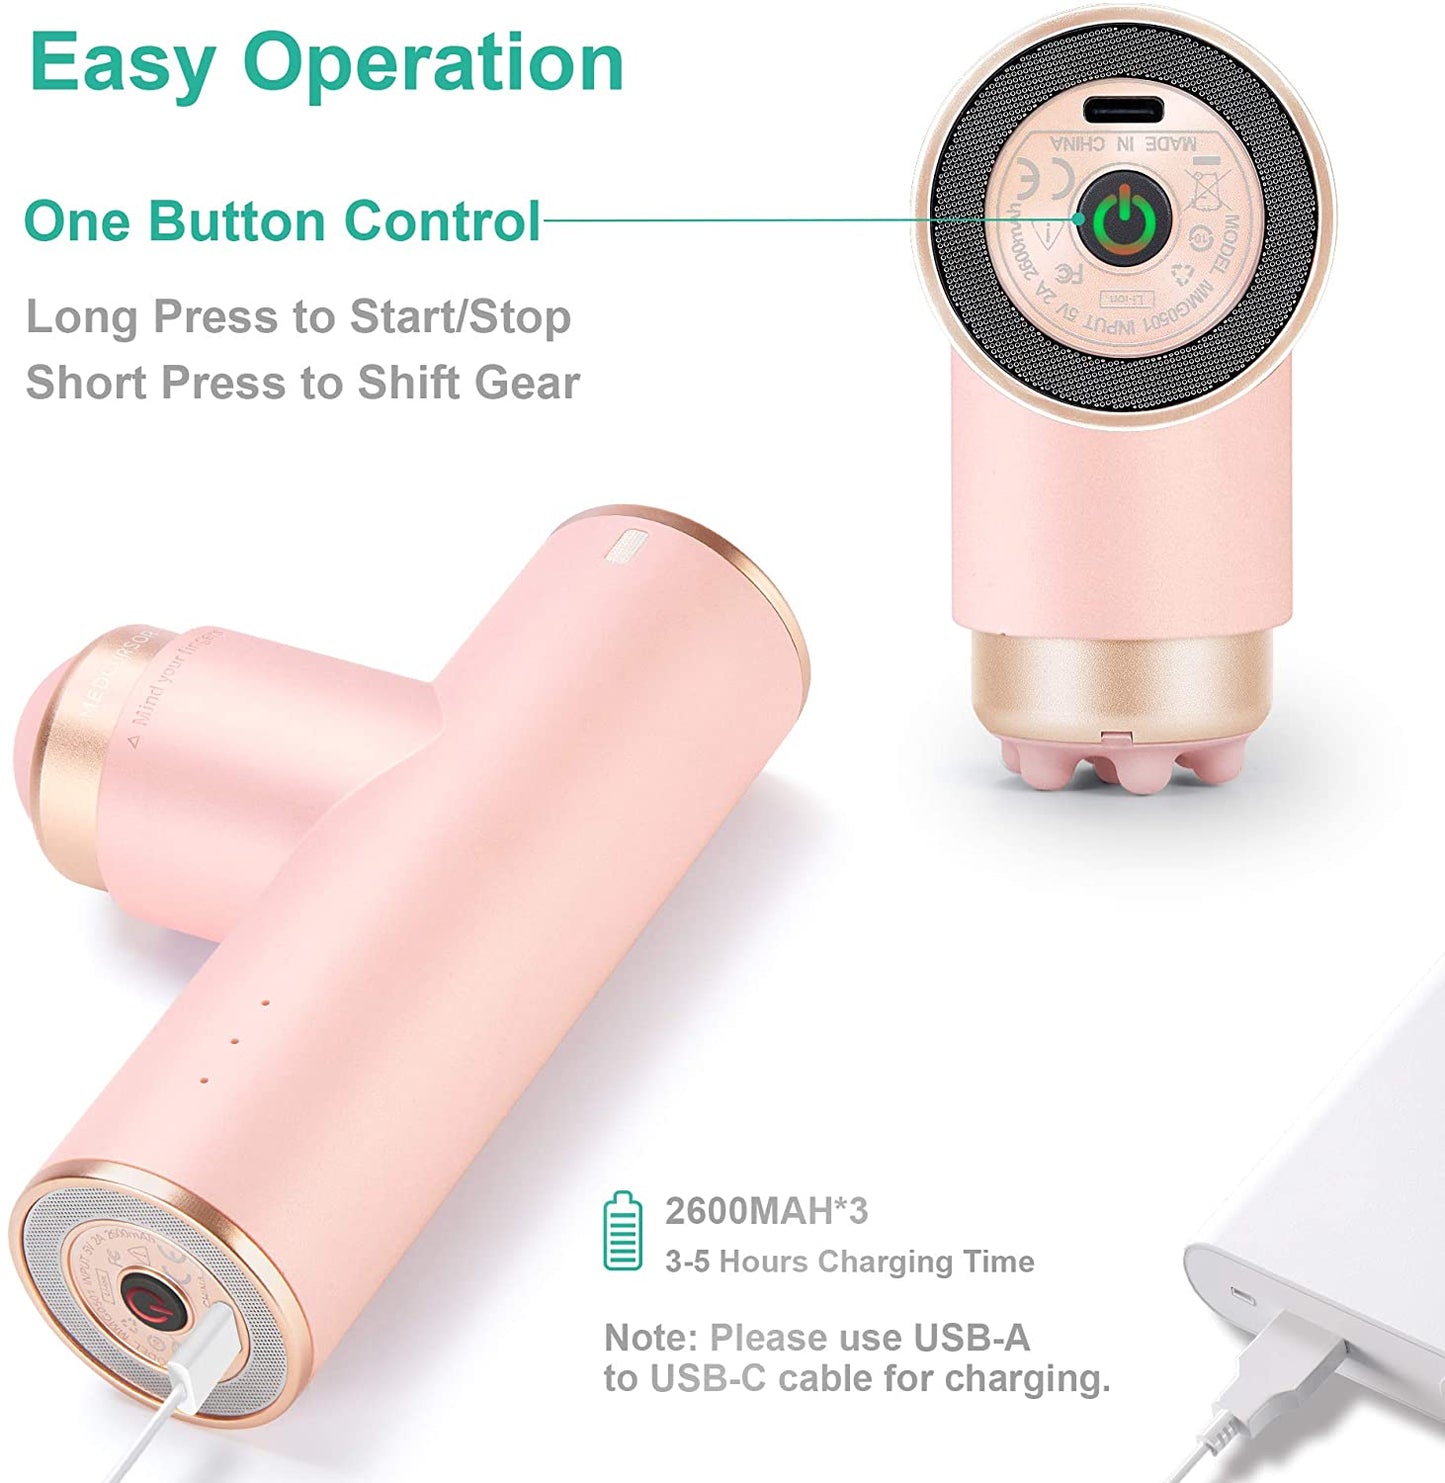 ** NEW ** Portable Mini Massage Gun, Quiet Powerful Brushless Motor, 4 Heads and 3 Modes Helps Relieve Soreness Pink